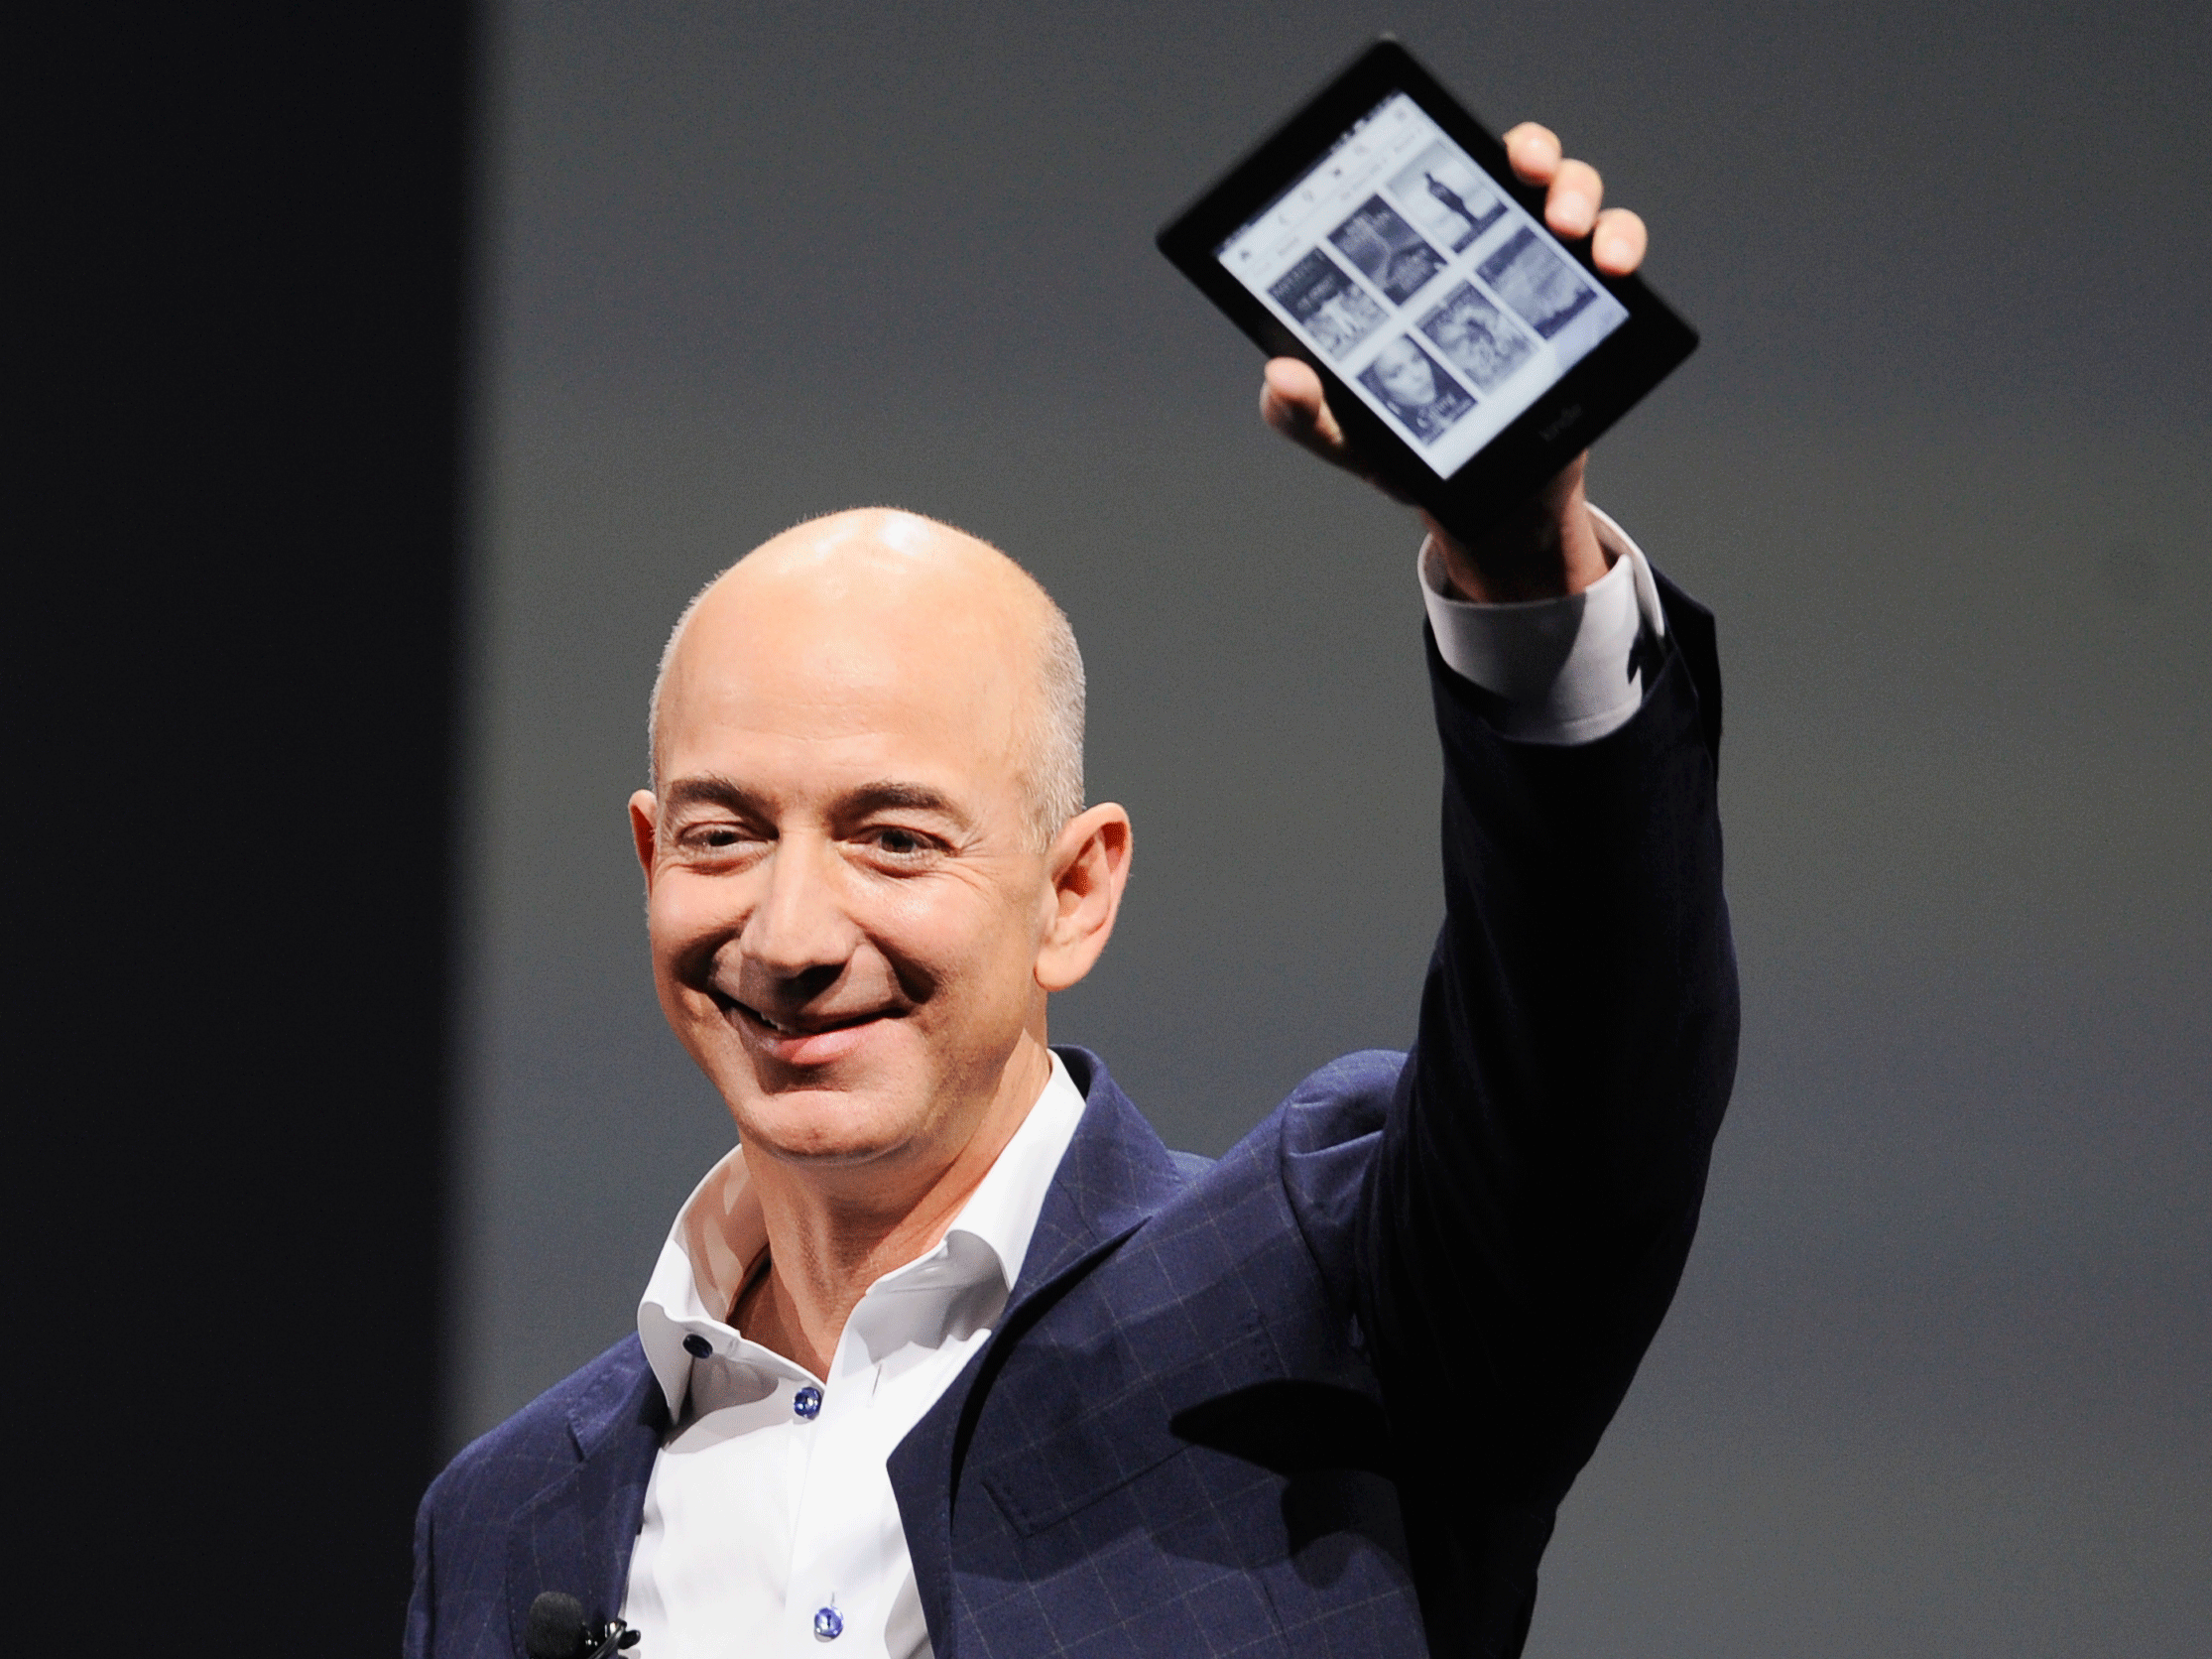 Jeff Bezos became the world’s richest person in 2017